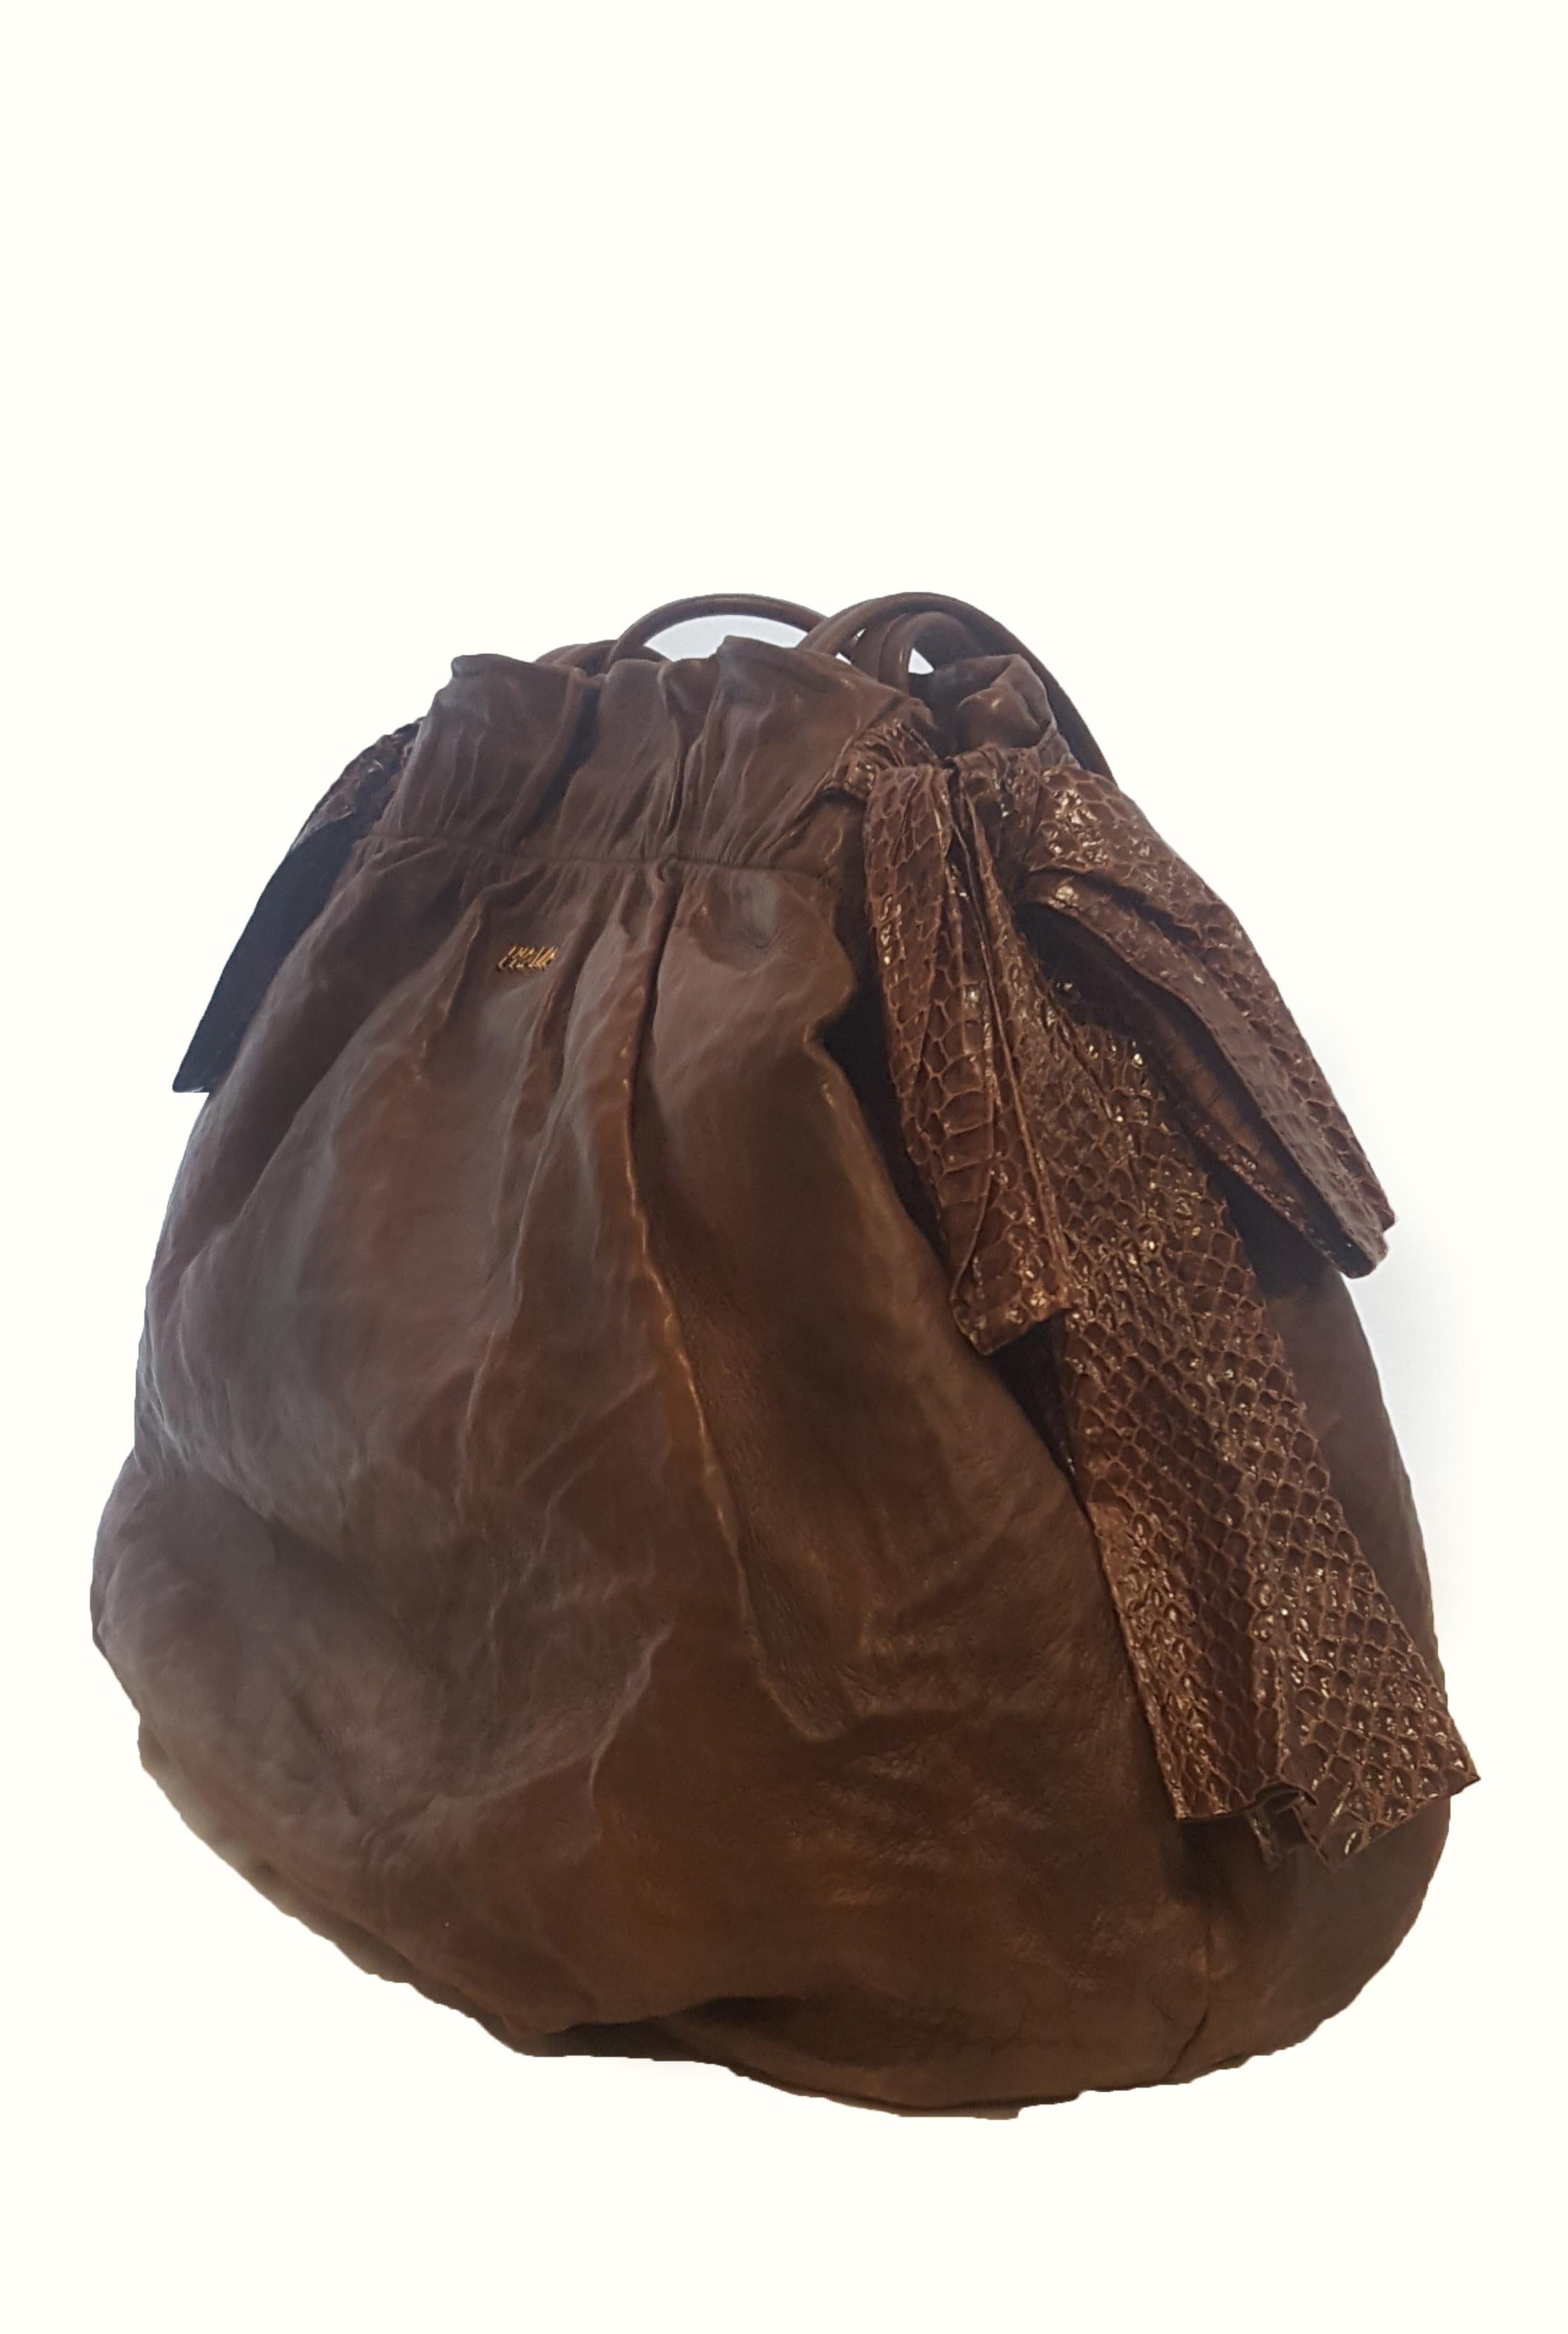 Prada Sabbia Nappa large antique bow satchel in brown, is a beautiful bag with signature details from the Italian brand. The bag features decorative brown snakeskin bows on each side.  Gathered at the top that includes a pressure snap for closure. 